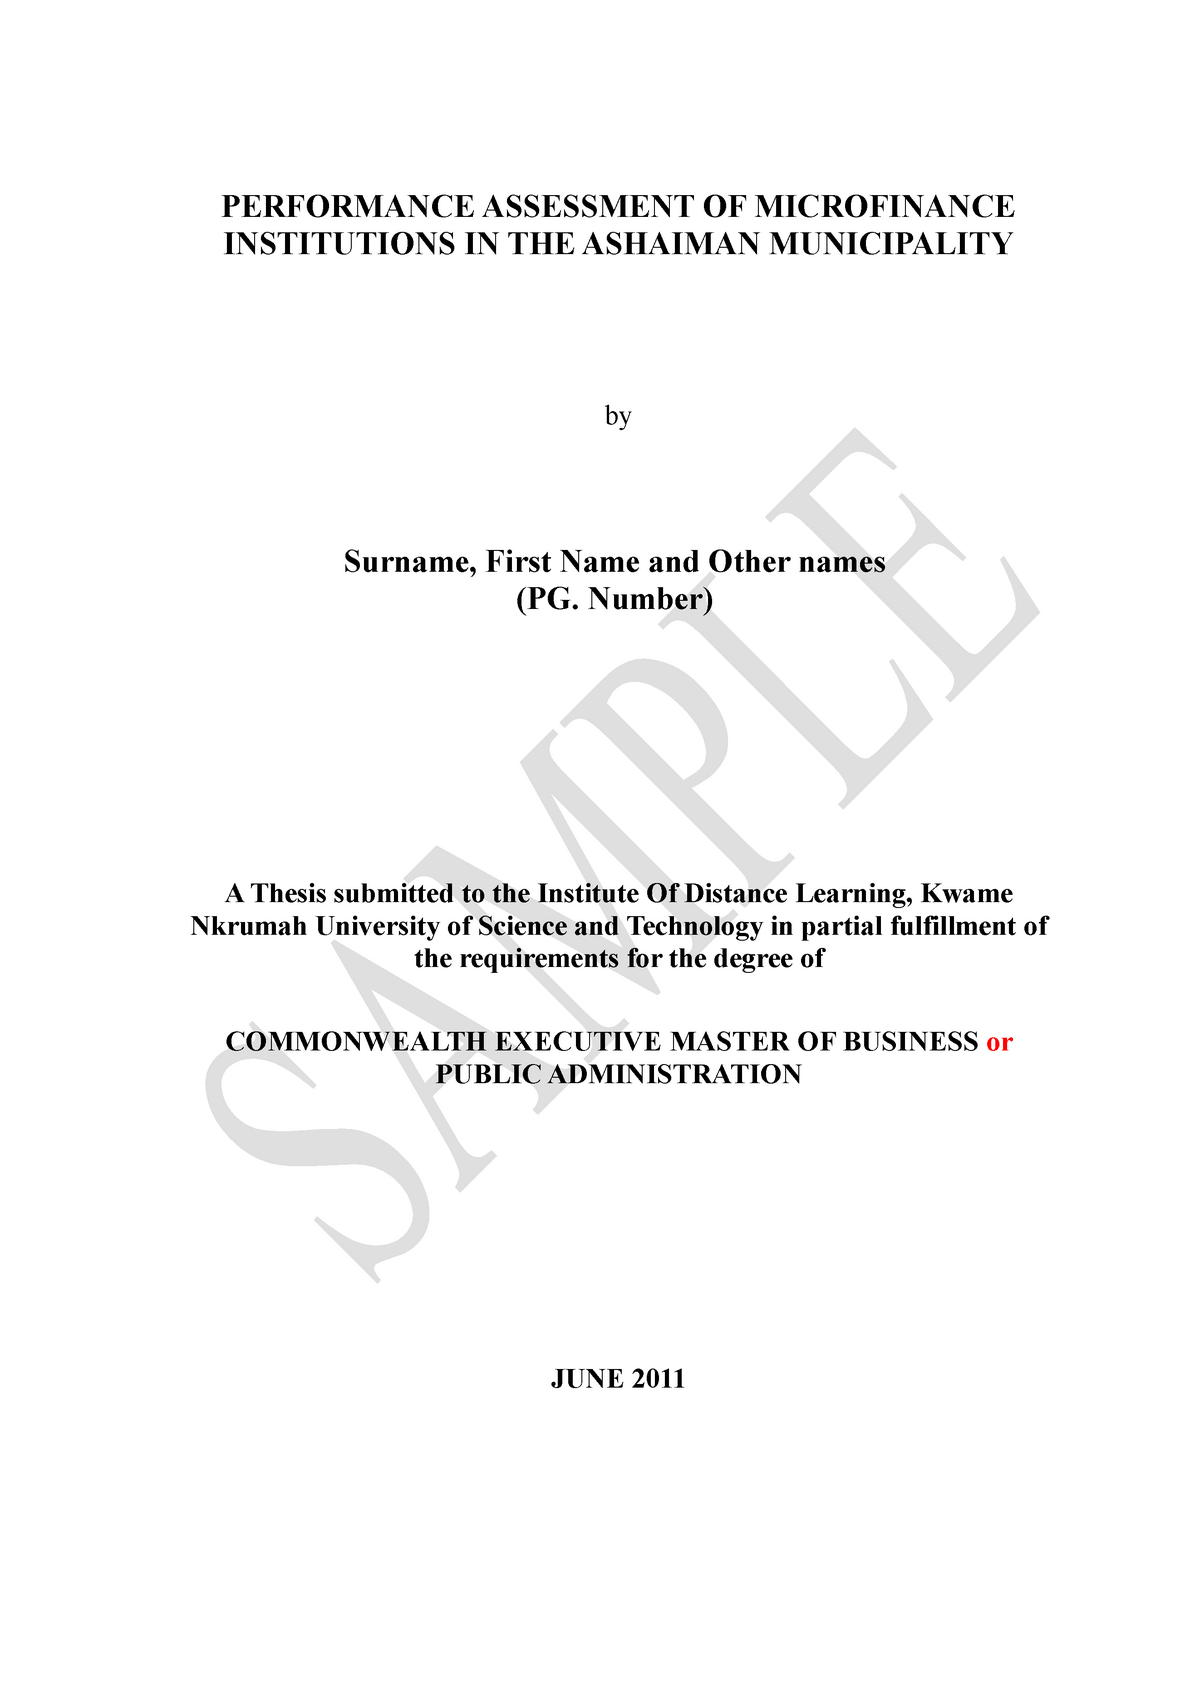 thesis submission mgr university